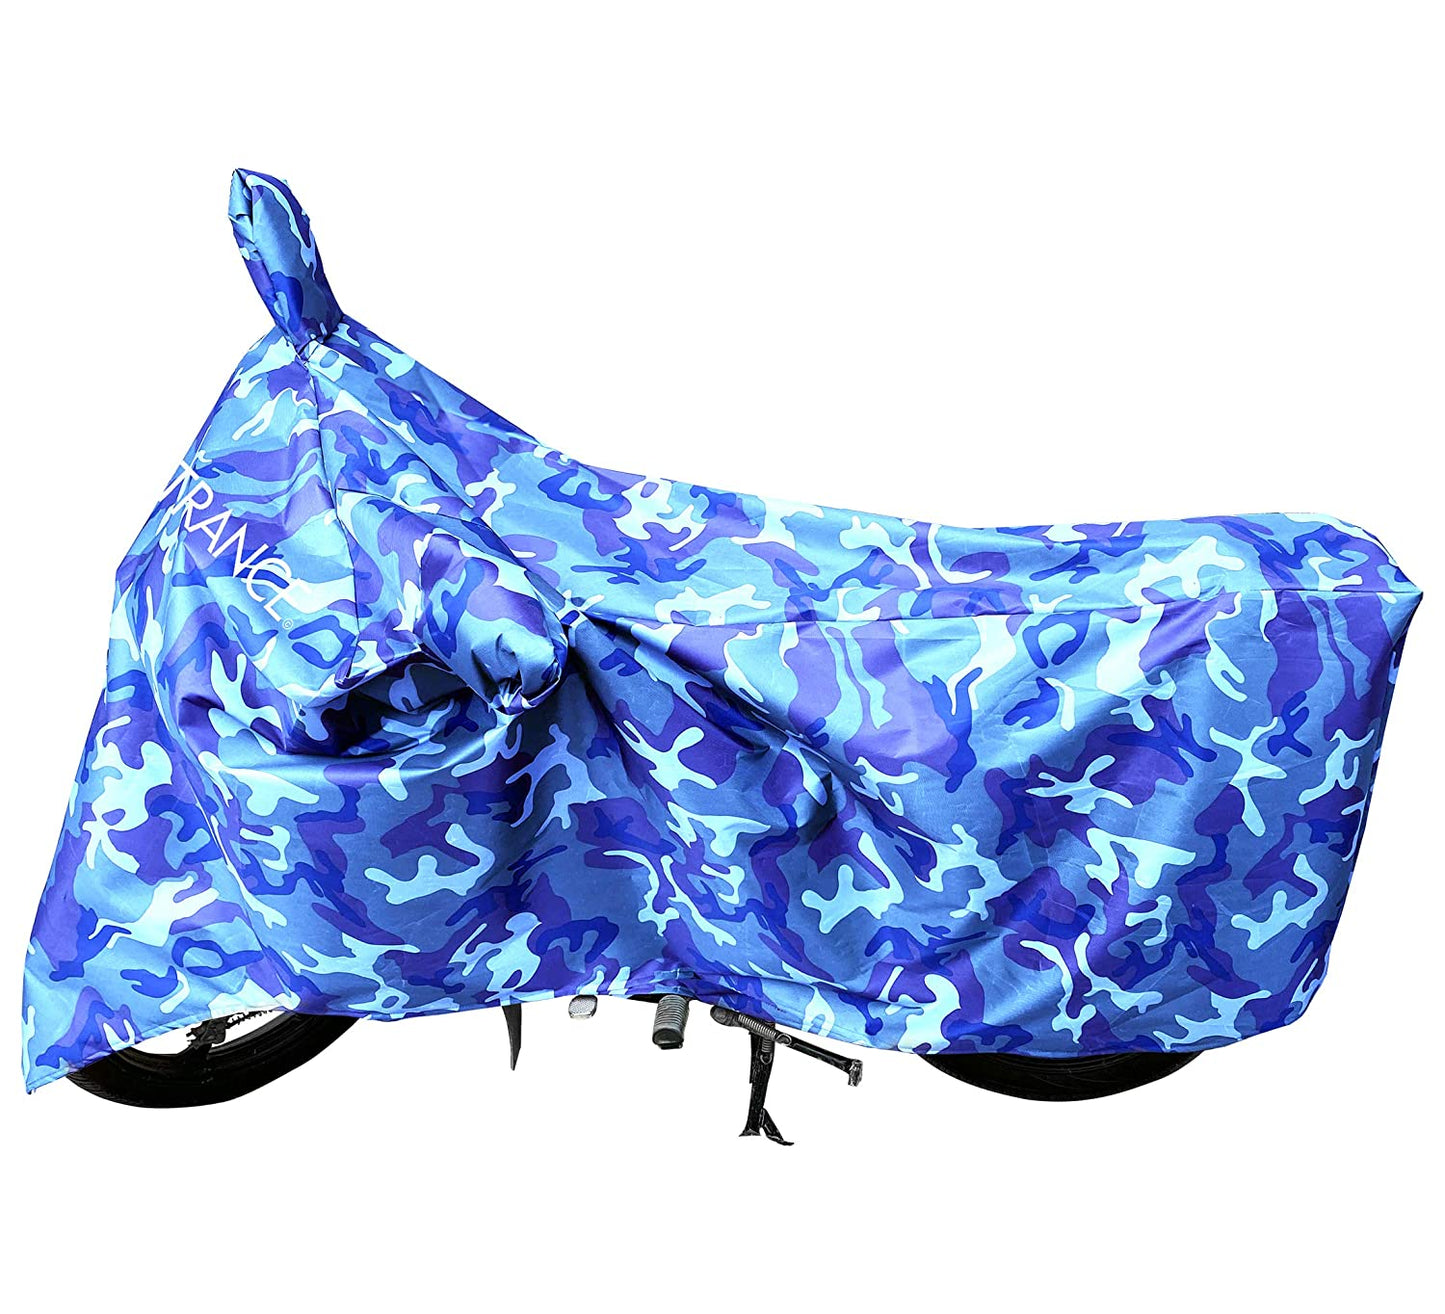 MotoTrance Jungle Bike Body Covers For Bajaj Pulsar AS200 - Interlock-Stitched Waterproof and Heat Resistant with Mirror Pockets